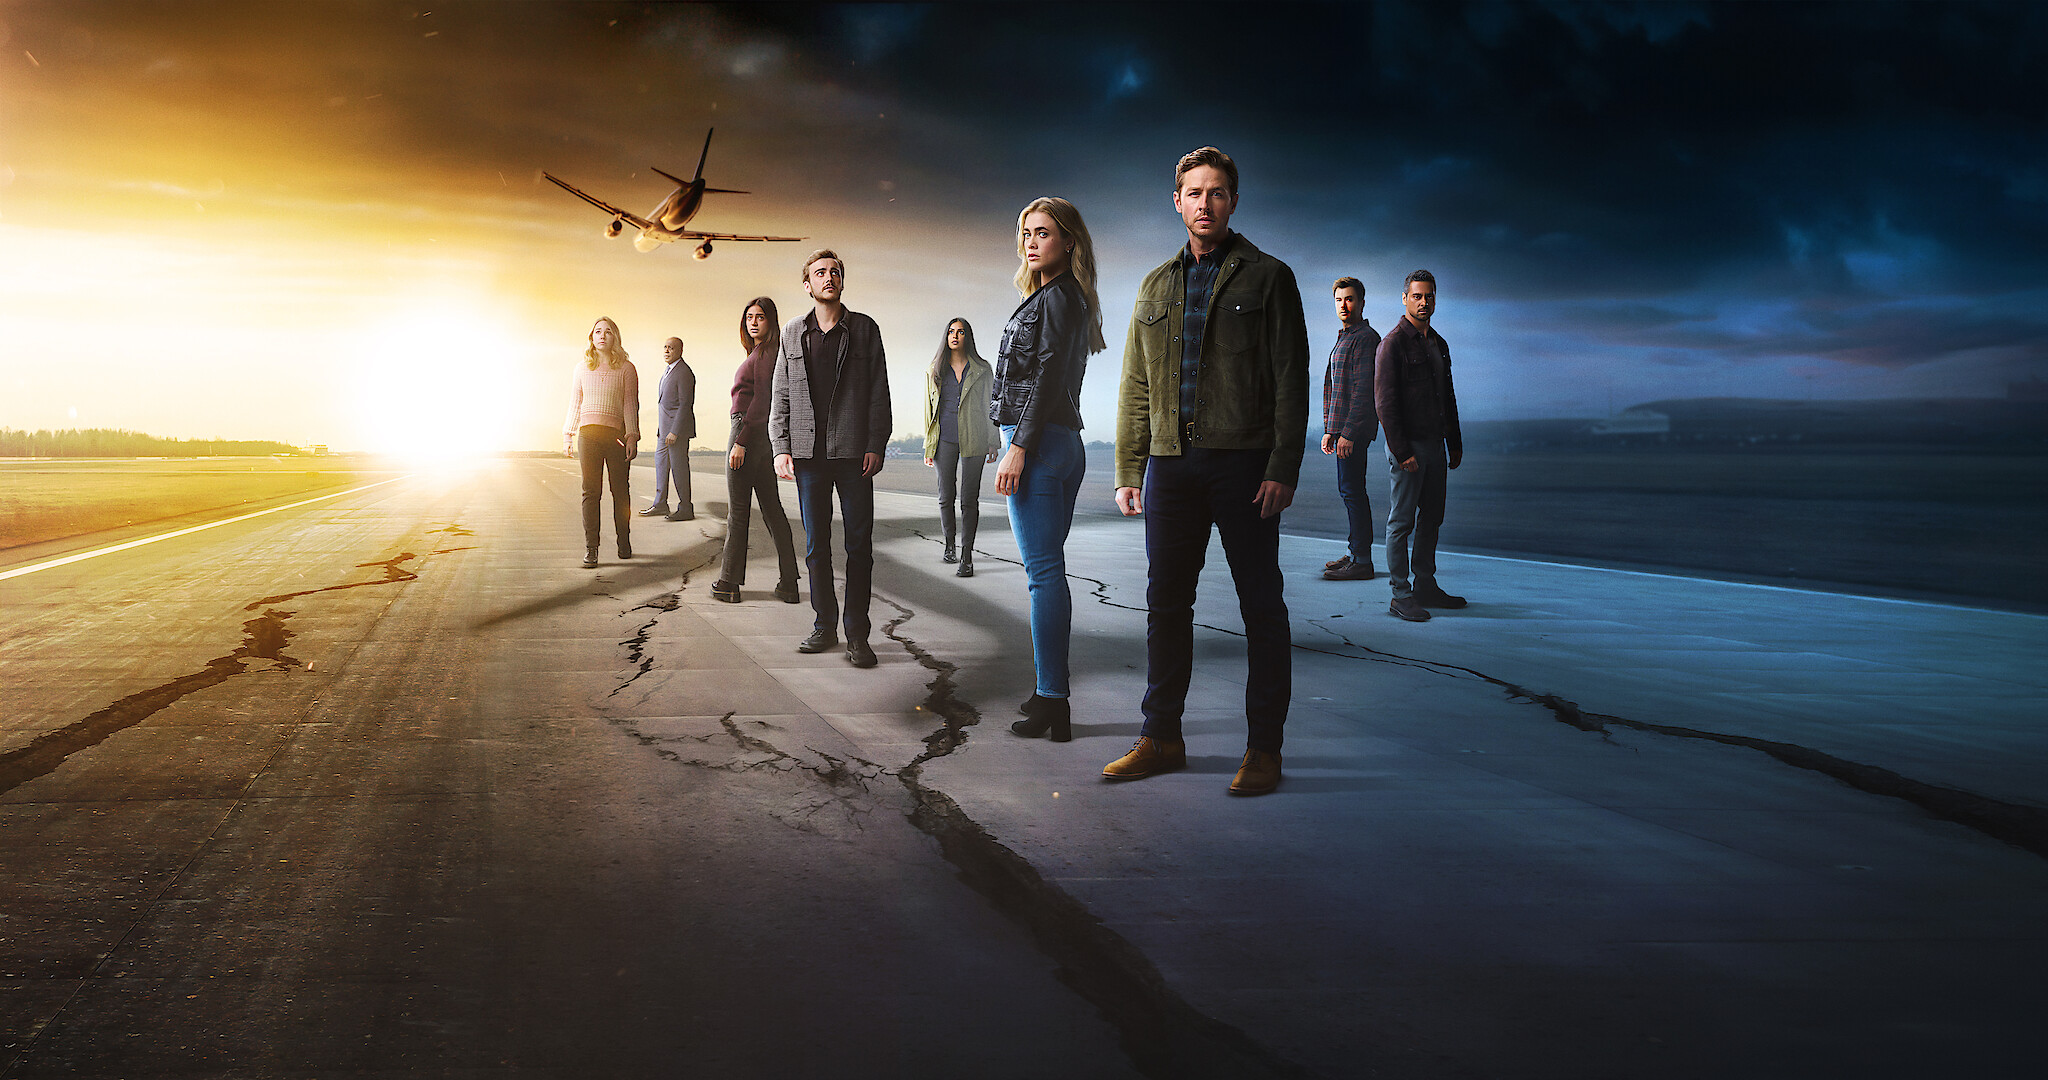 Manifest' Cast: See Who's Coming on Board for the Final Season - Netflix  Tudum